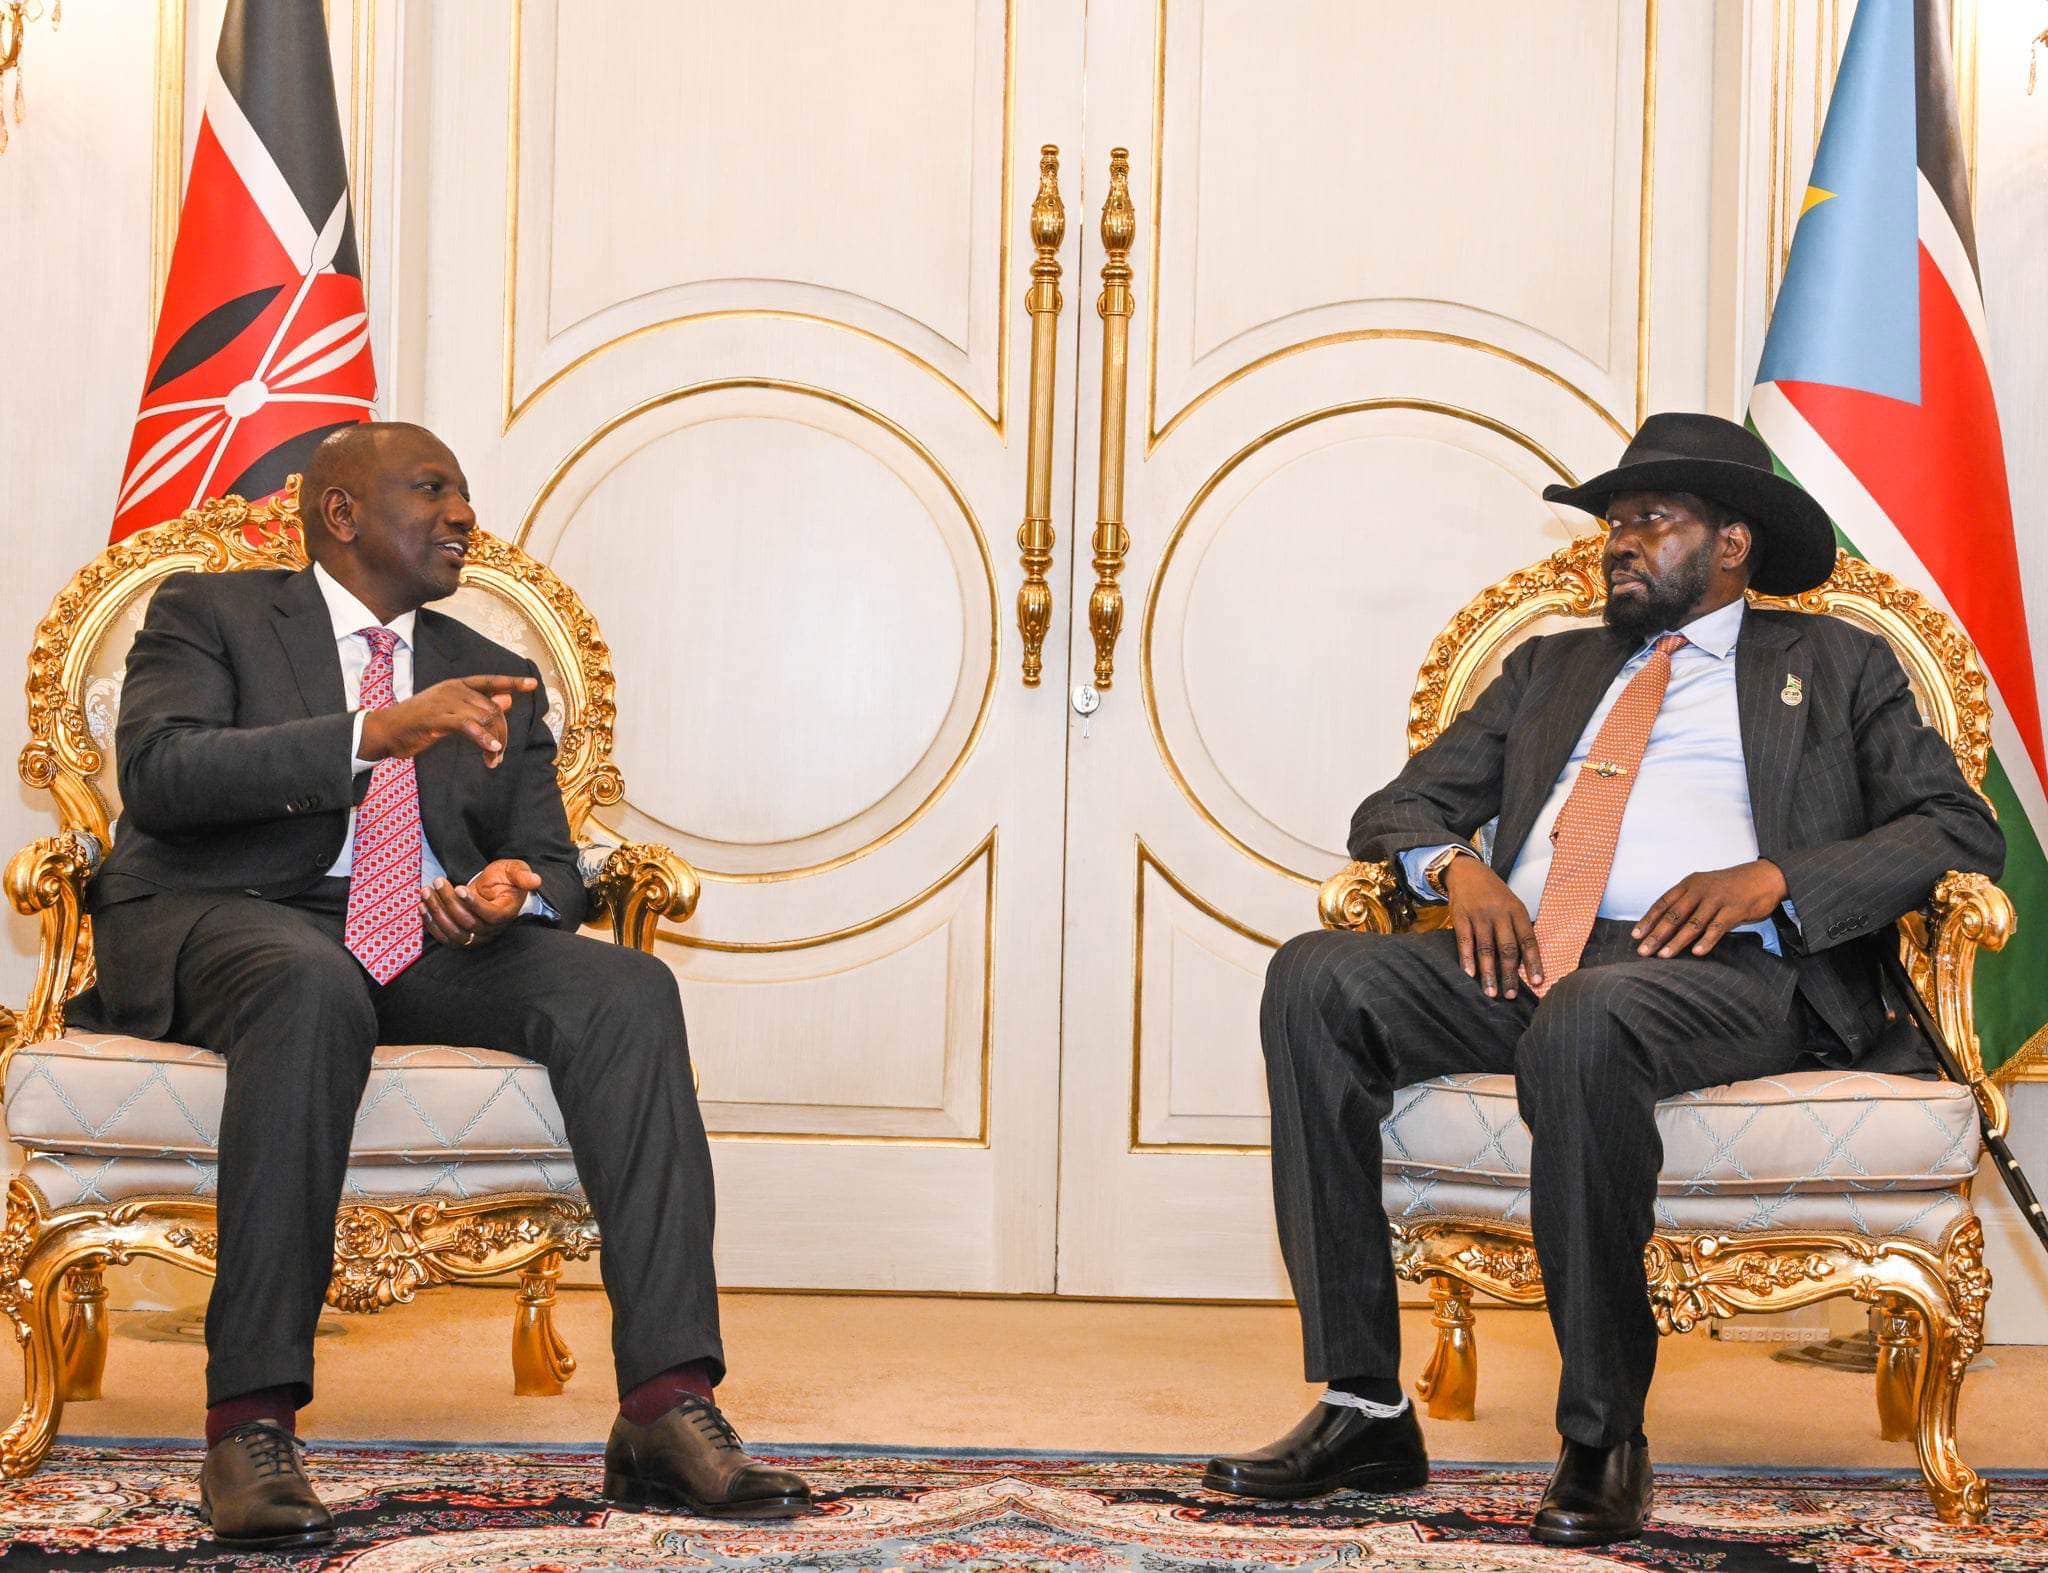 Kenya outlines policies to revive trade relations with S. Sudan